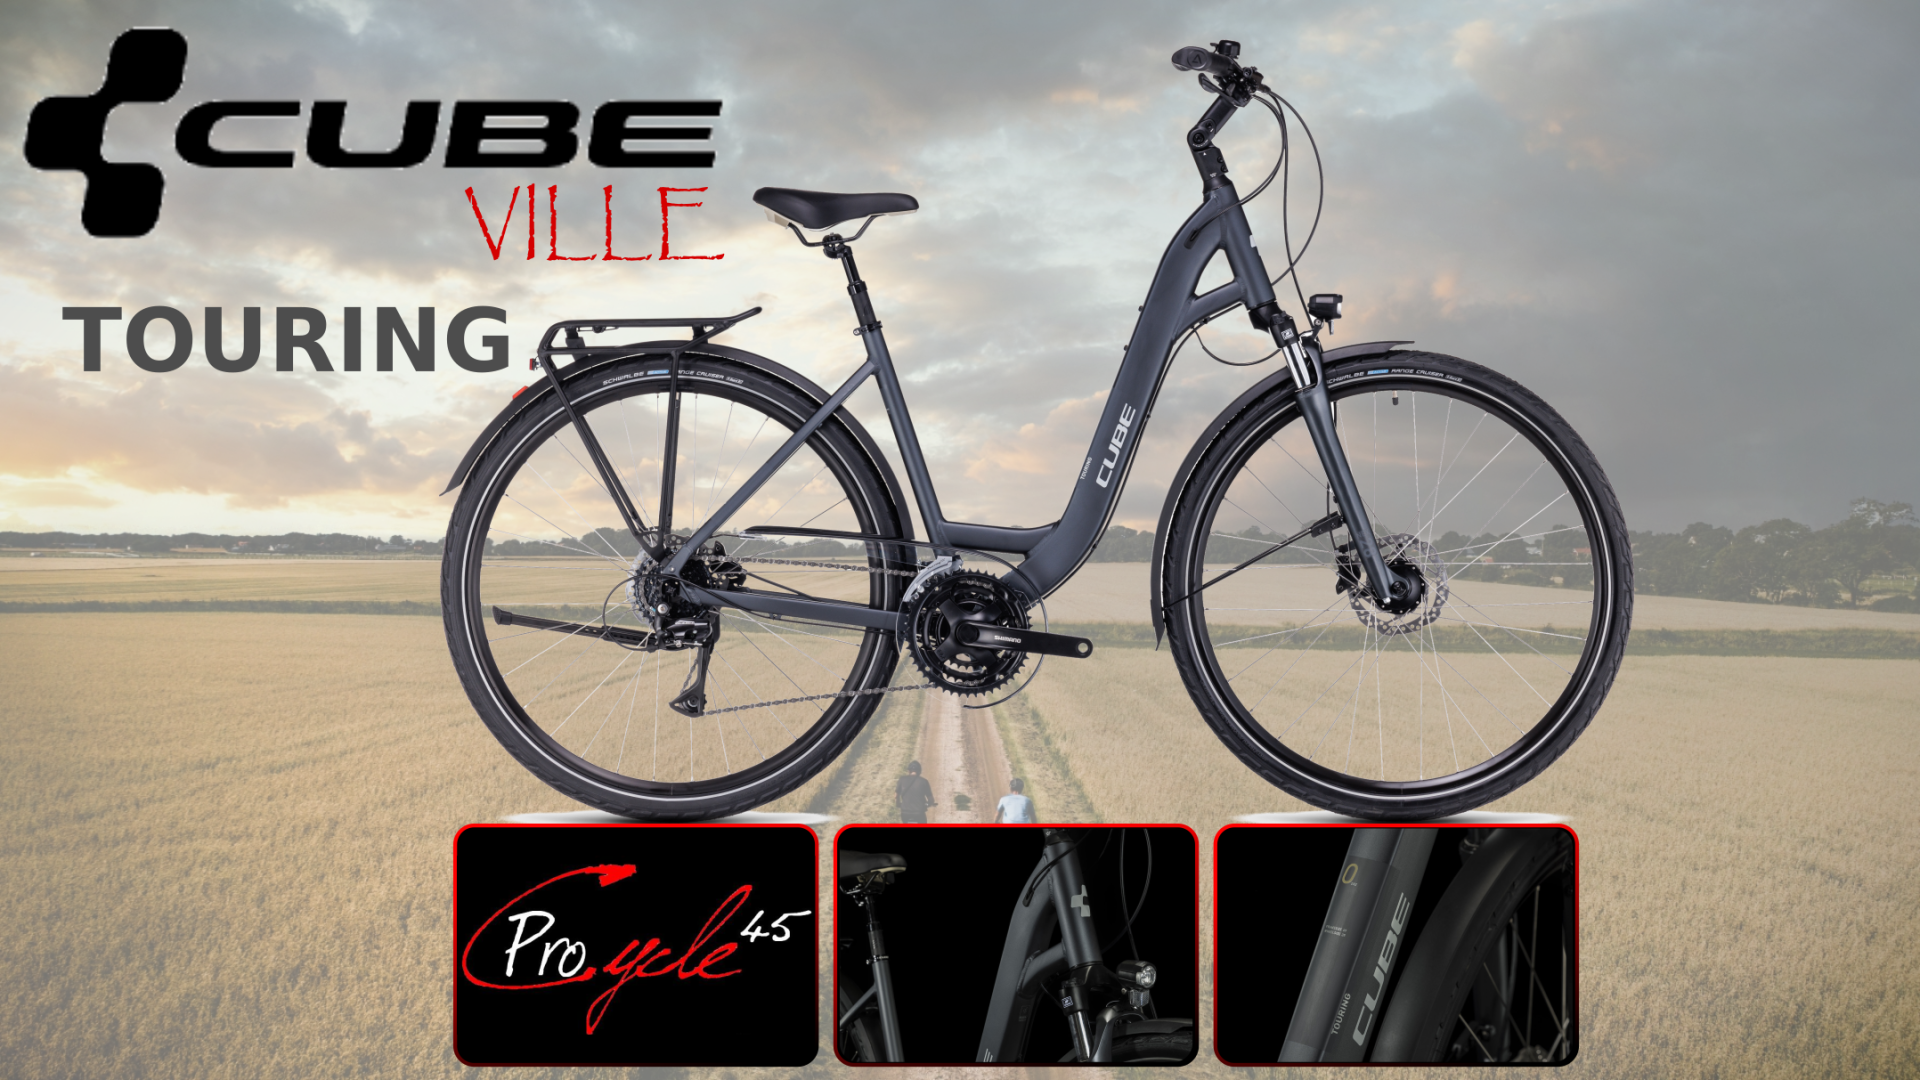 Photo du magasin PRO CYCLE 45